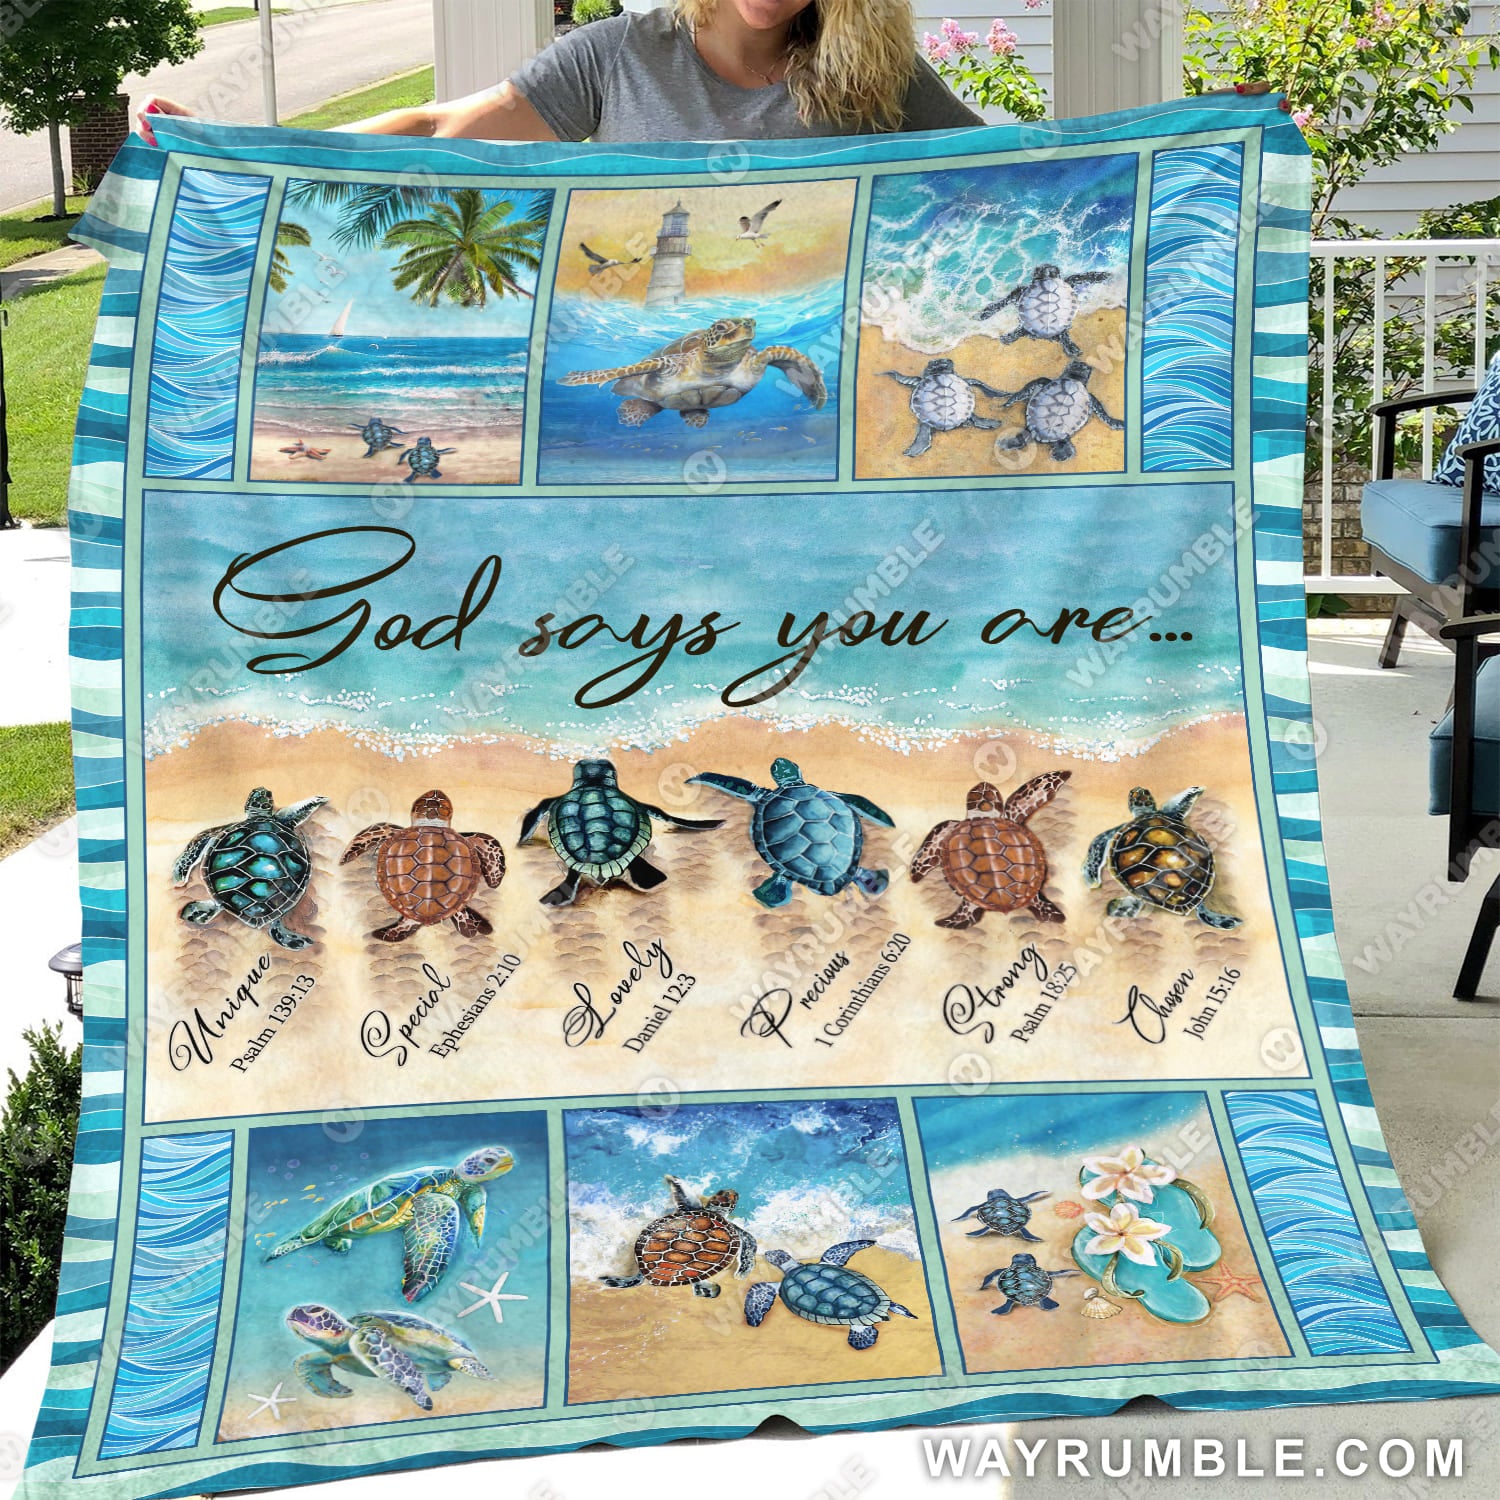 Sea turtles, To the ocean, Sand beach,  God says you are - Jesus Blanket